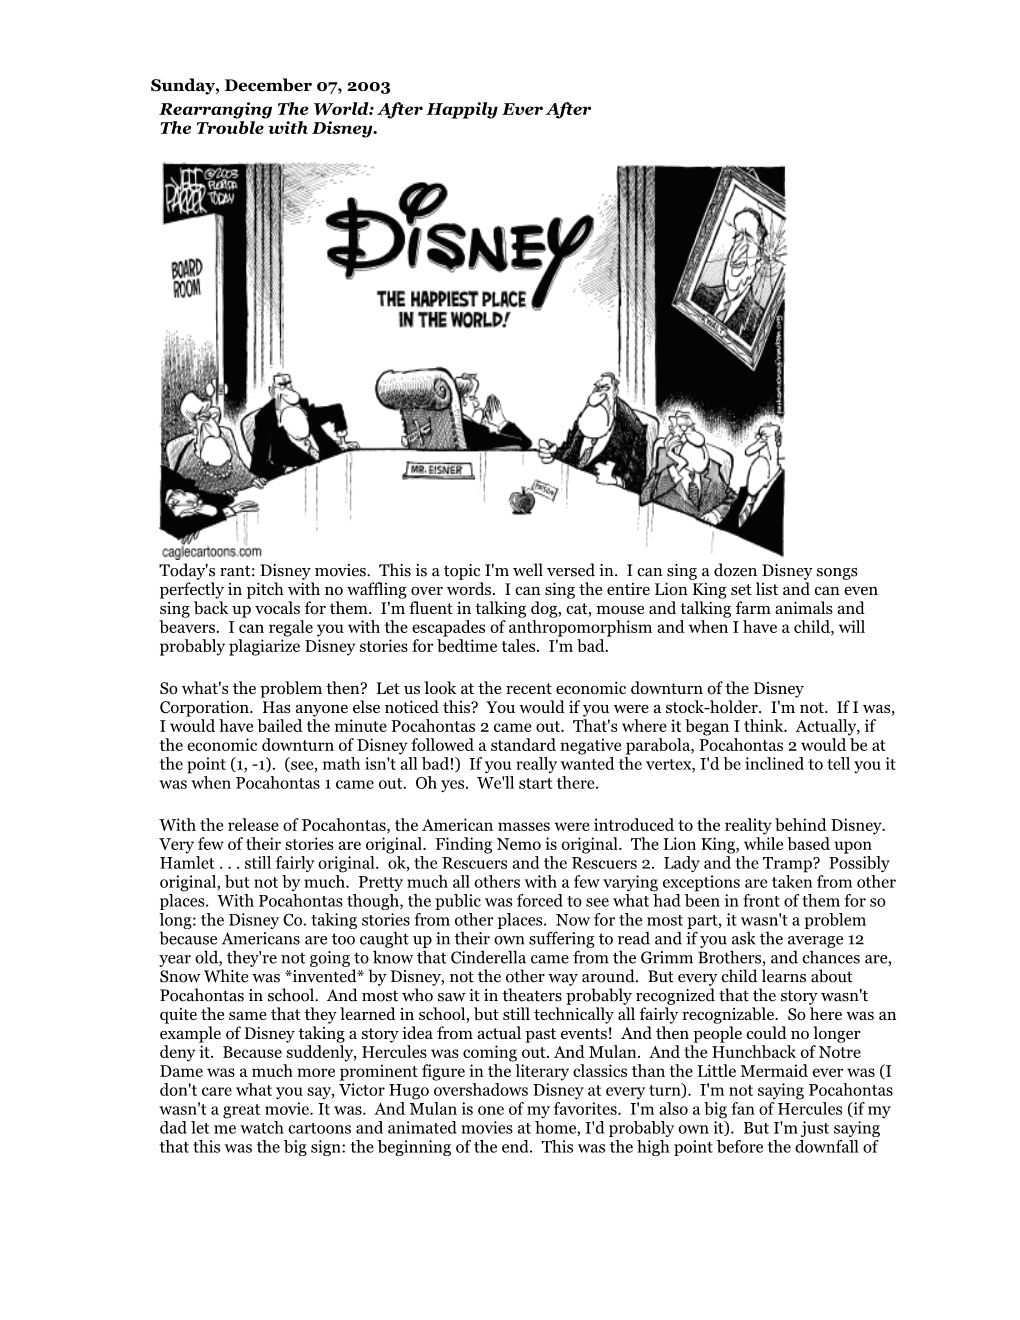 Rearranging the World: After Happily Ever After the Trouble with Disney. Today's Rant